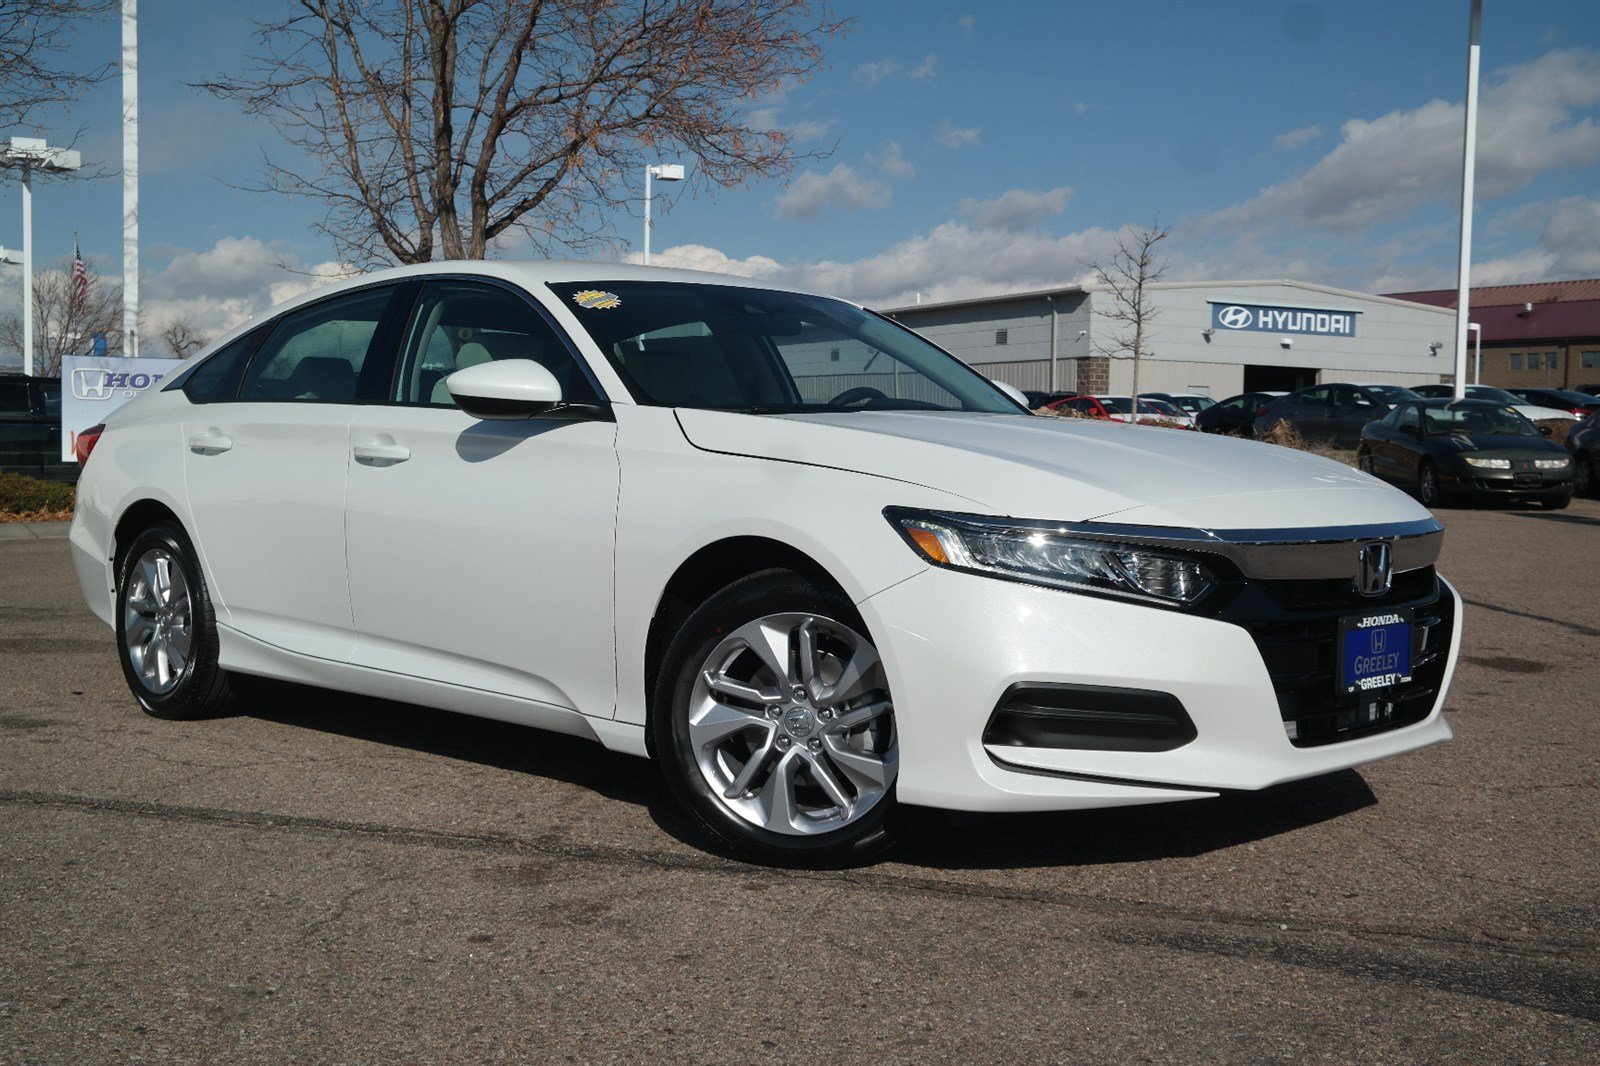 New 2018 Honda Accord LX 1.5T 4dr Car in Greeley 18H865